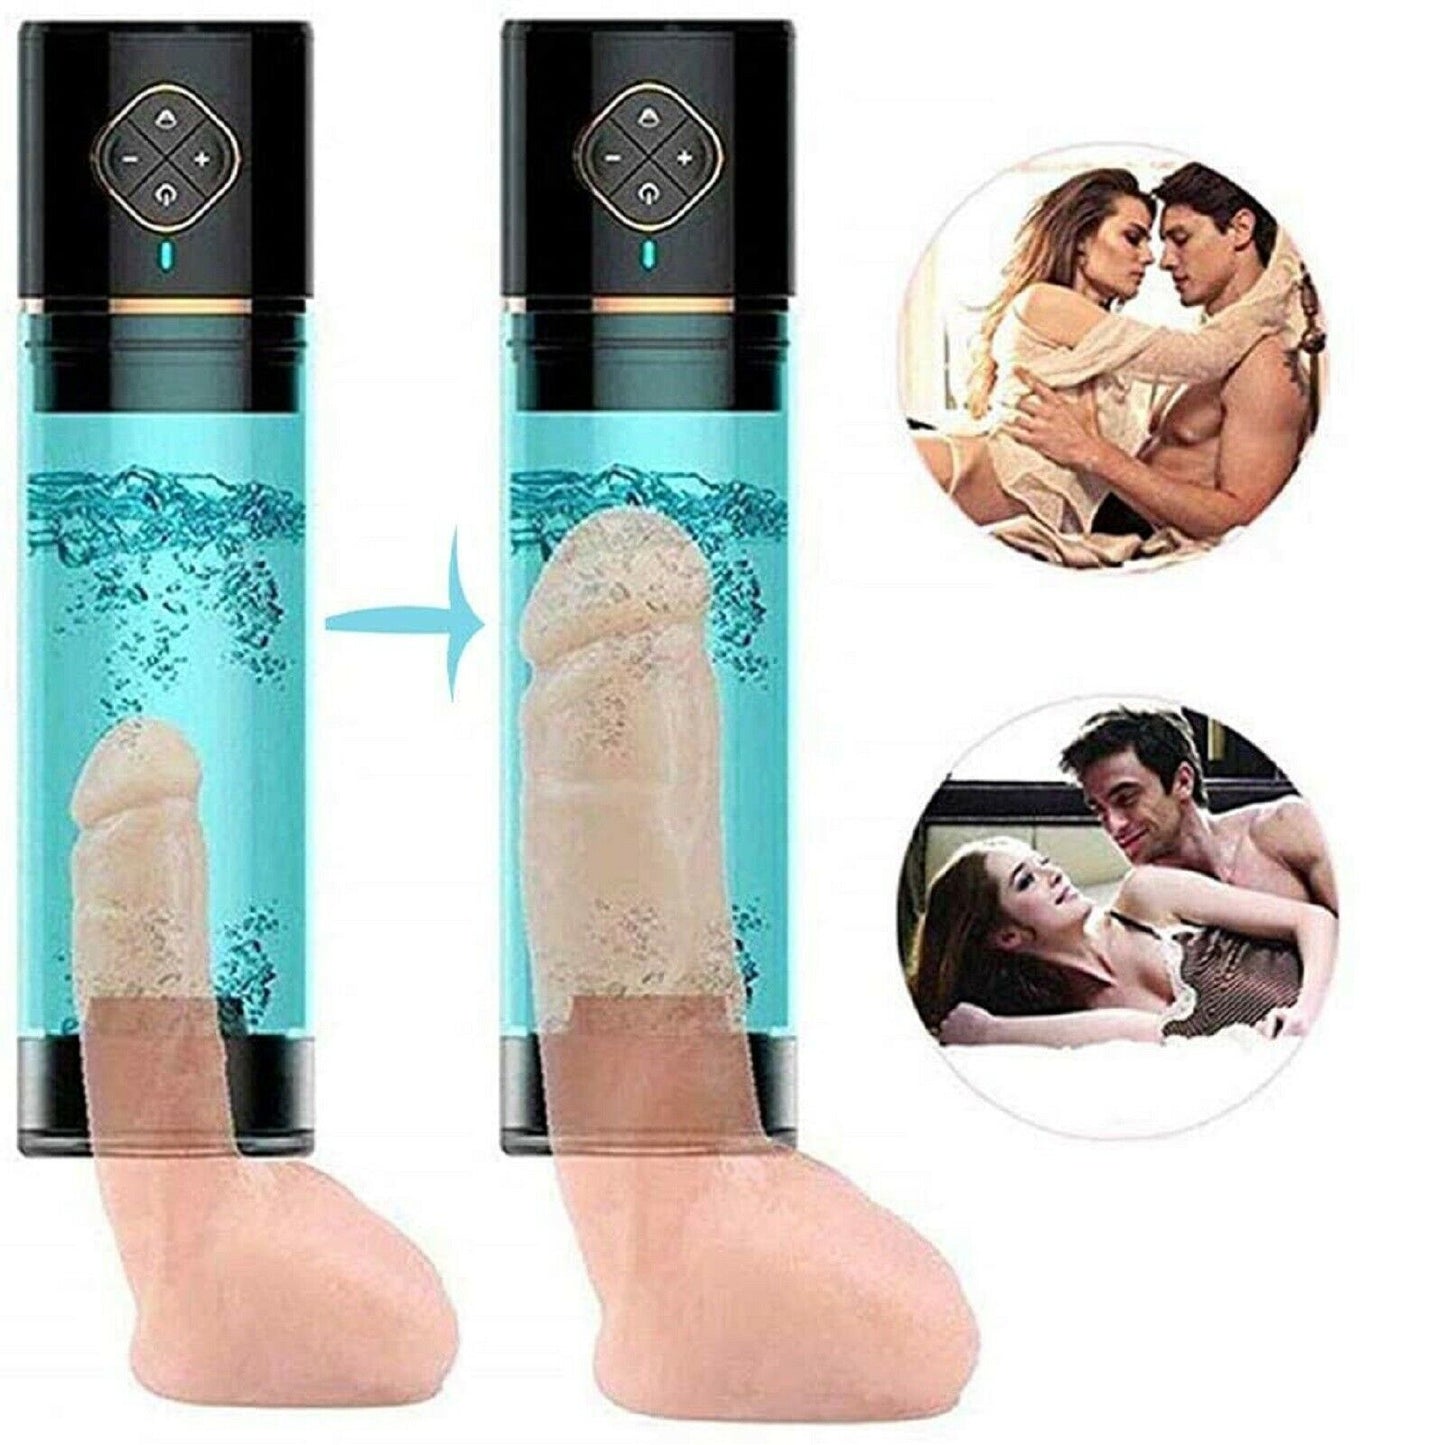 Rechargeable Vacuum Water Hydro Pump Enlarger Male Penis Cock Erection Stretcher